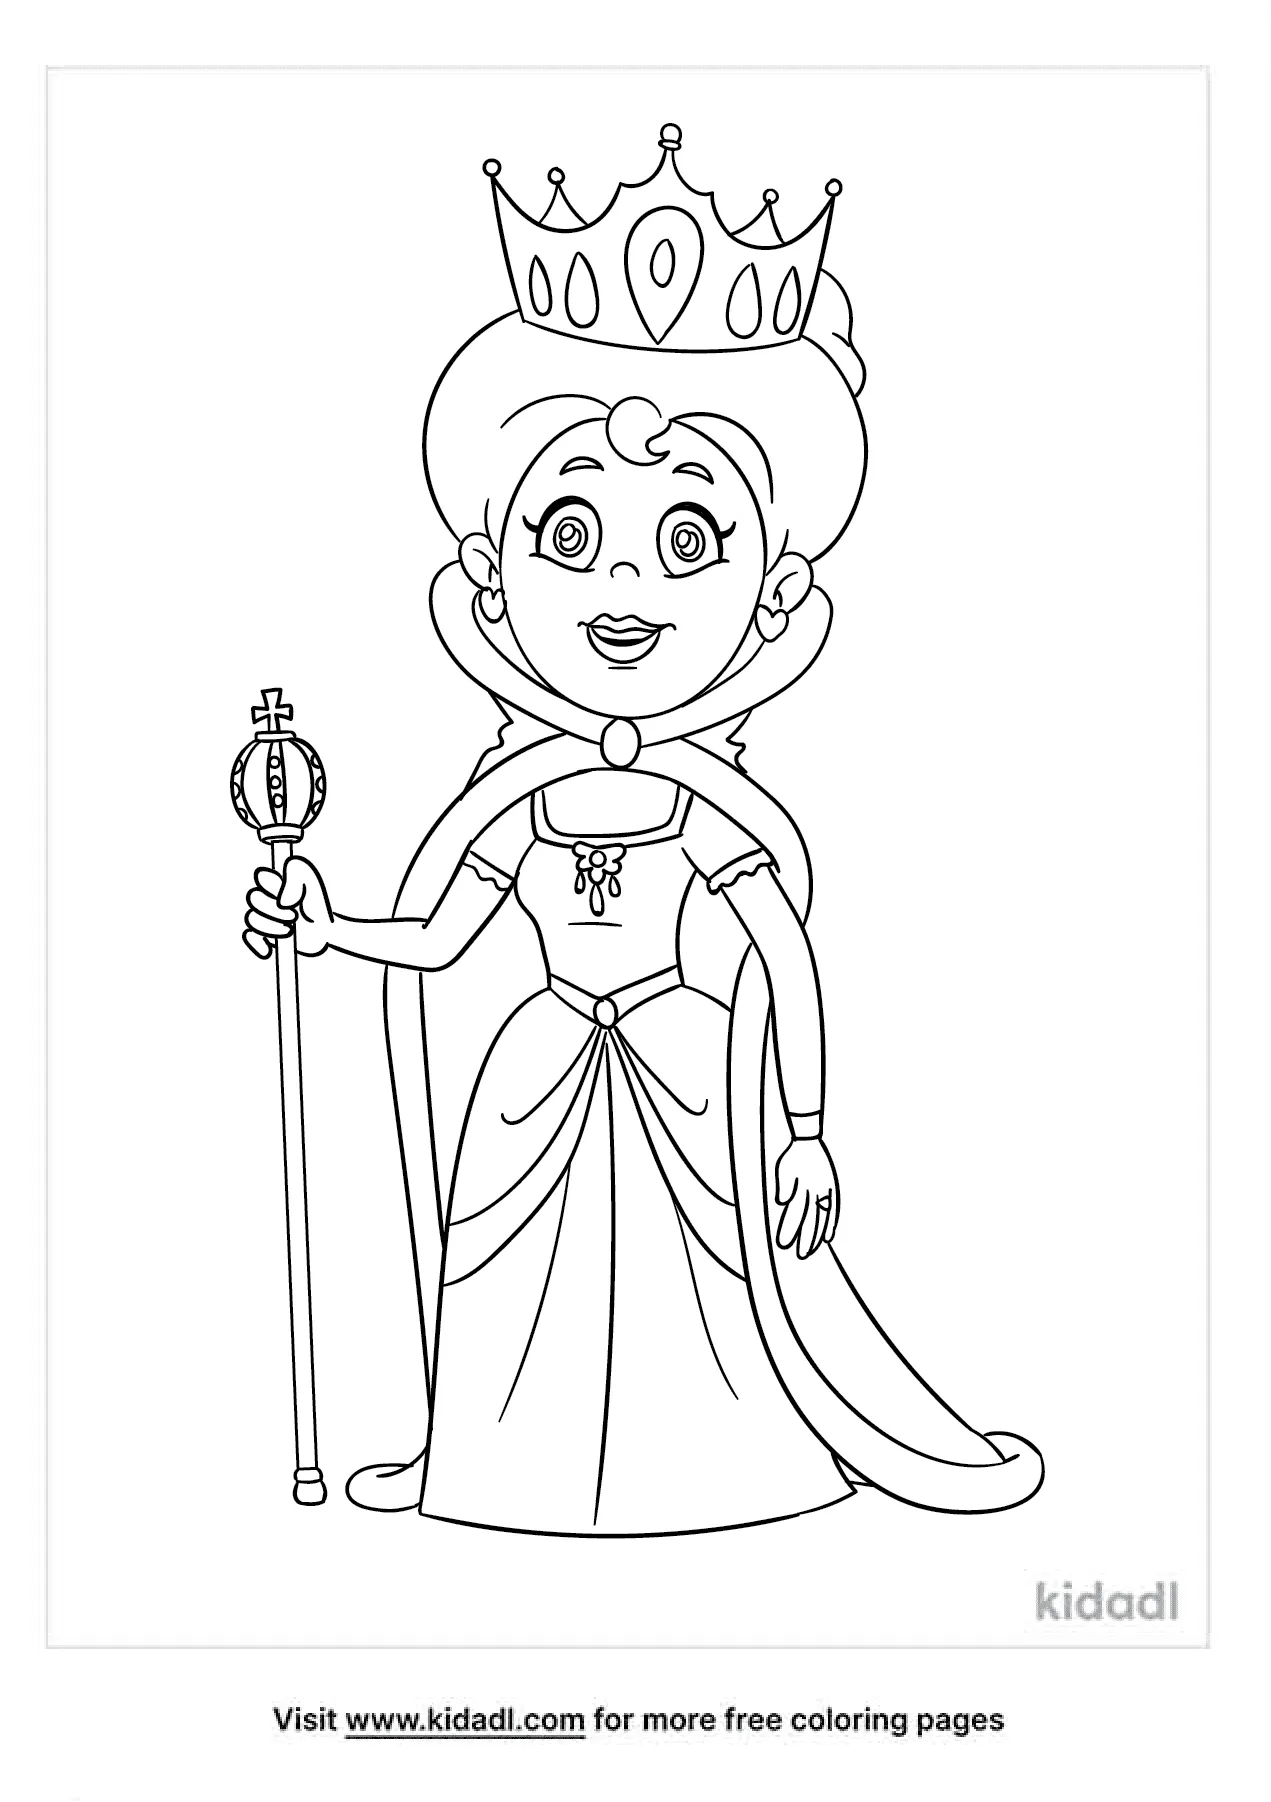 Queen Coloring Pages   Free Fantasy and characters Coloring Pages ...